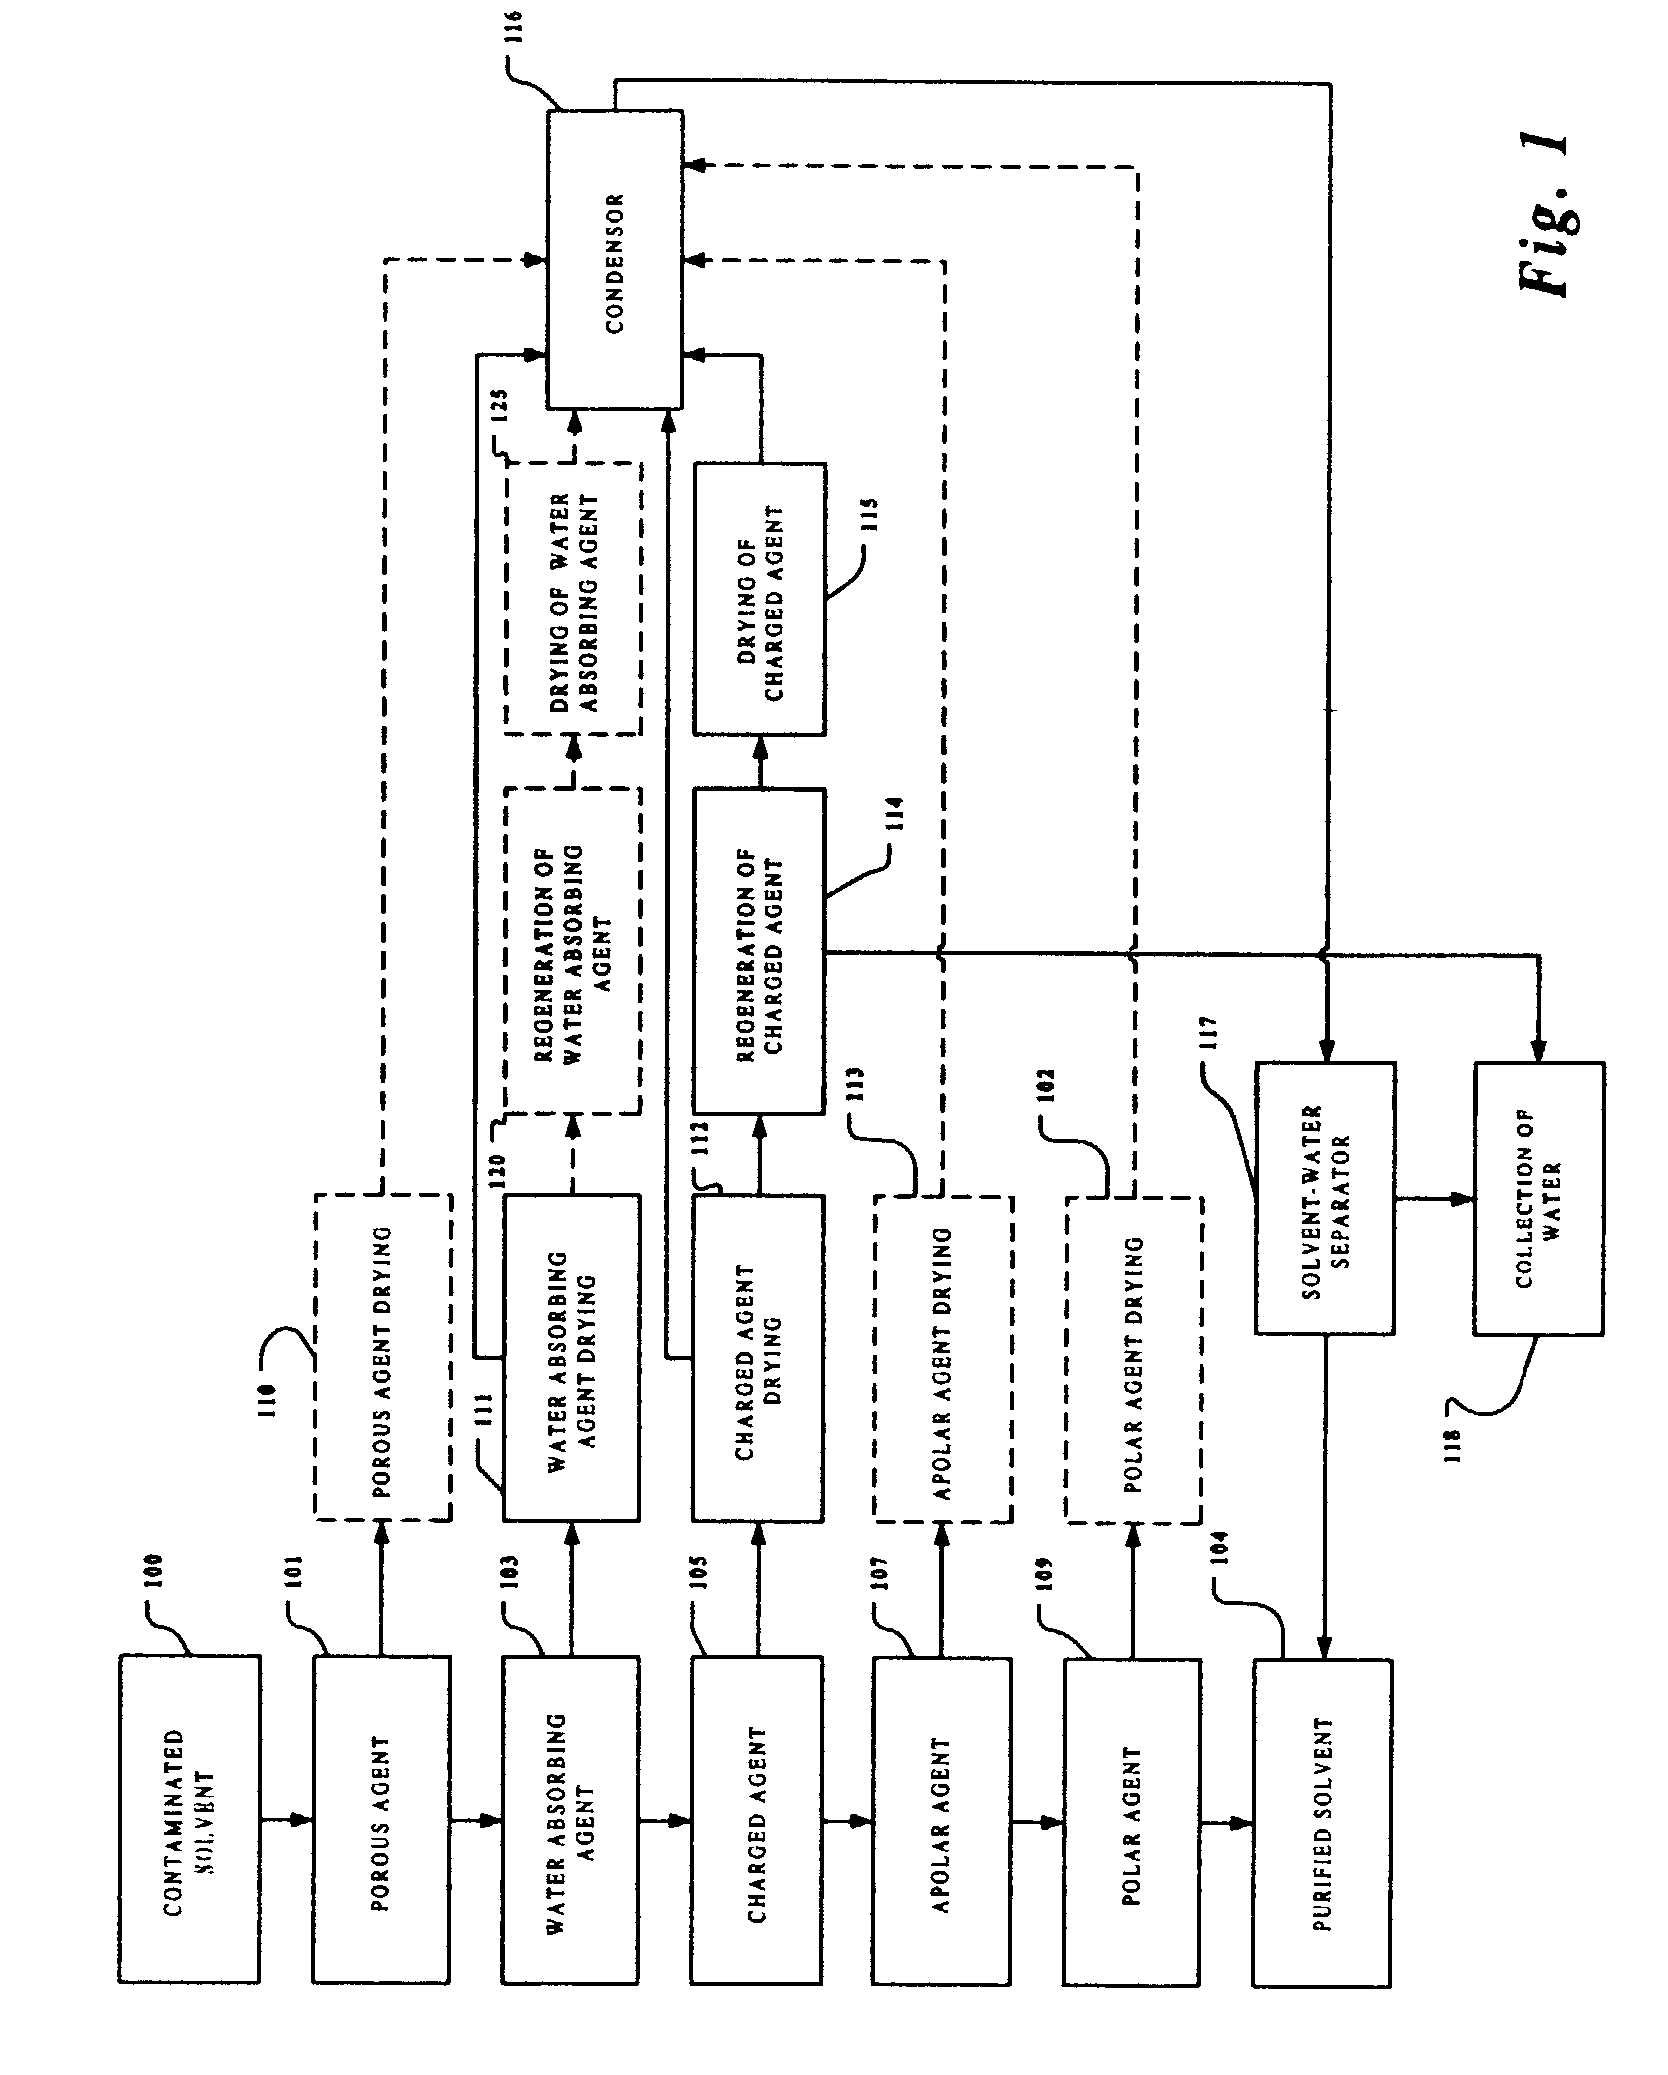 Method for processing a contaminant-containing lipophilic fluid